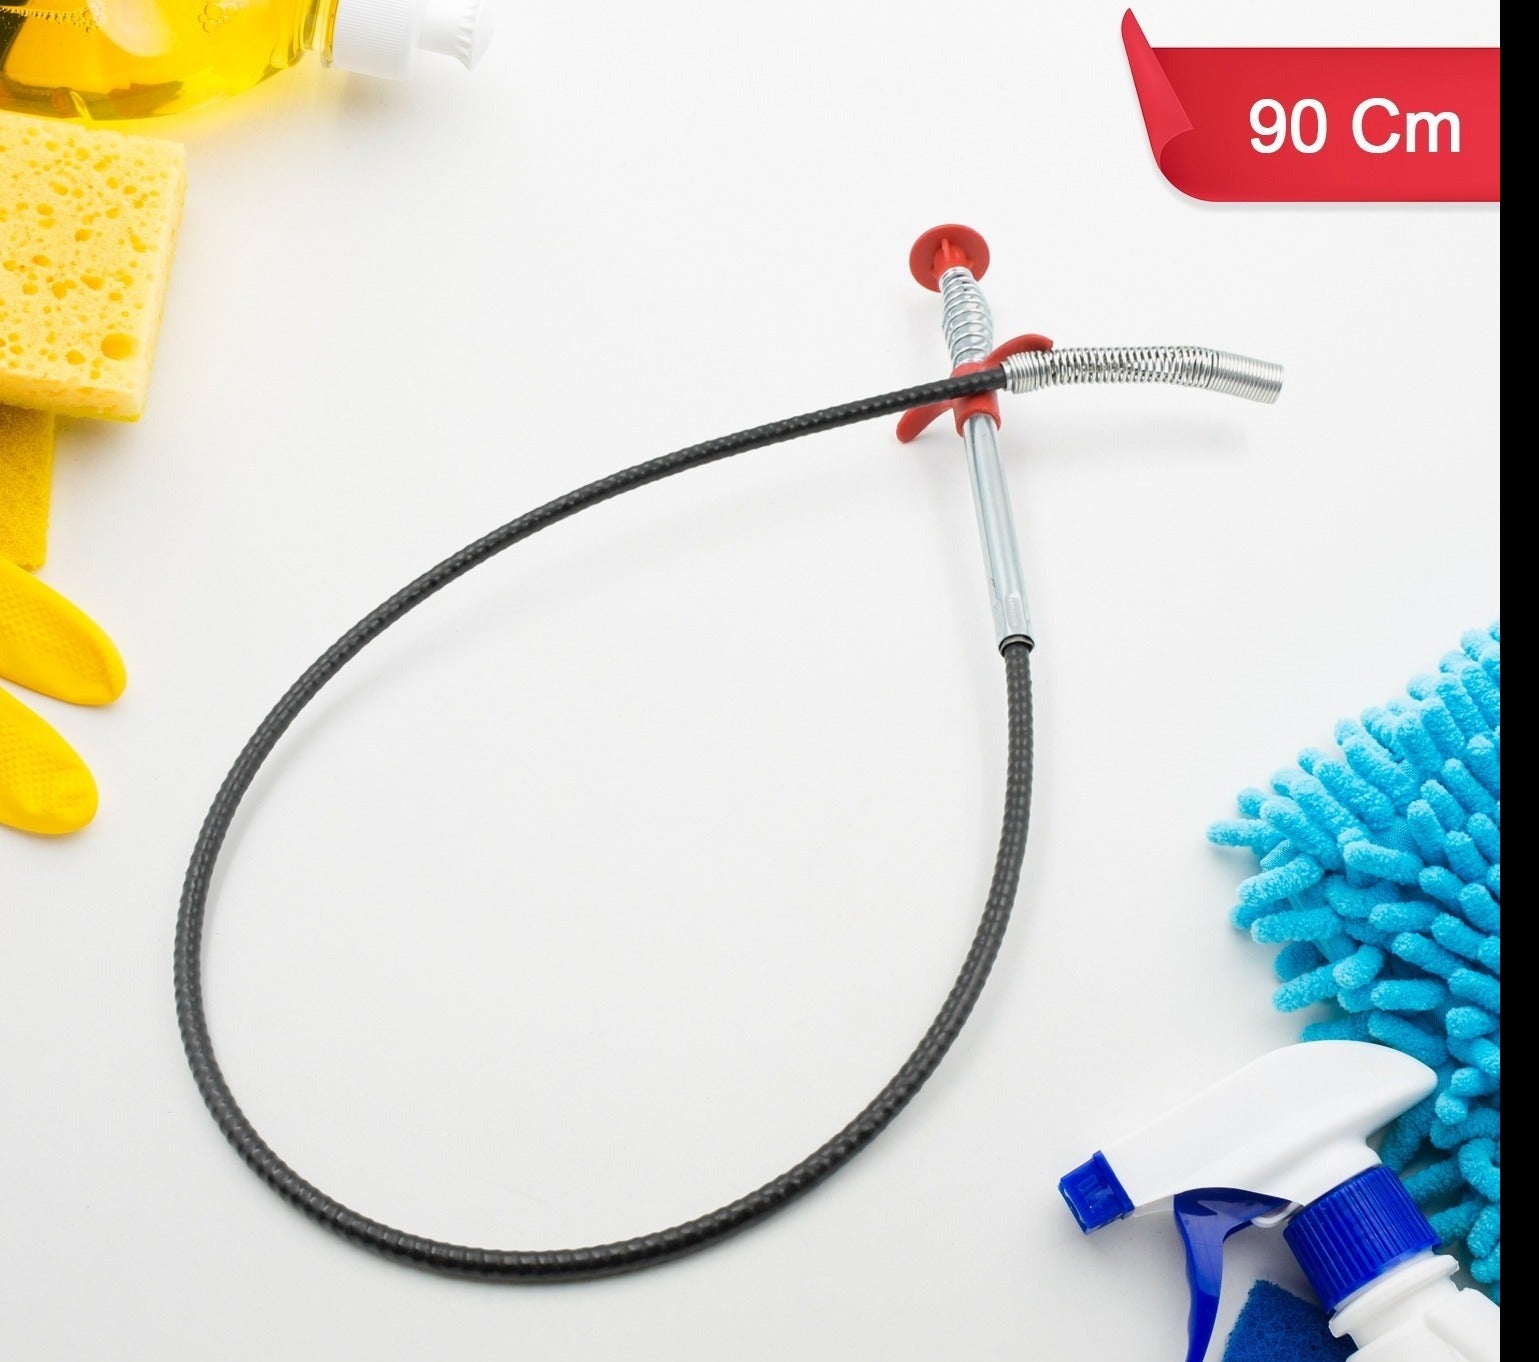 Drain Claw: Multifunctional 90cm Pipe Cleaner